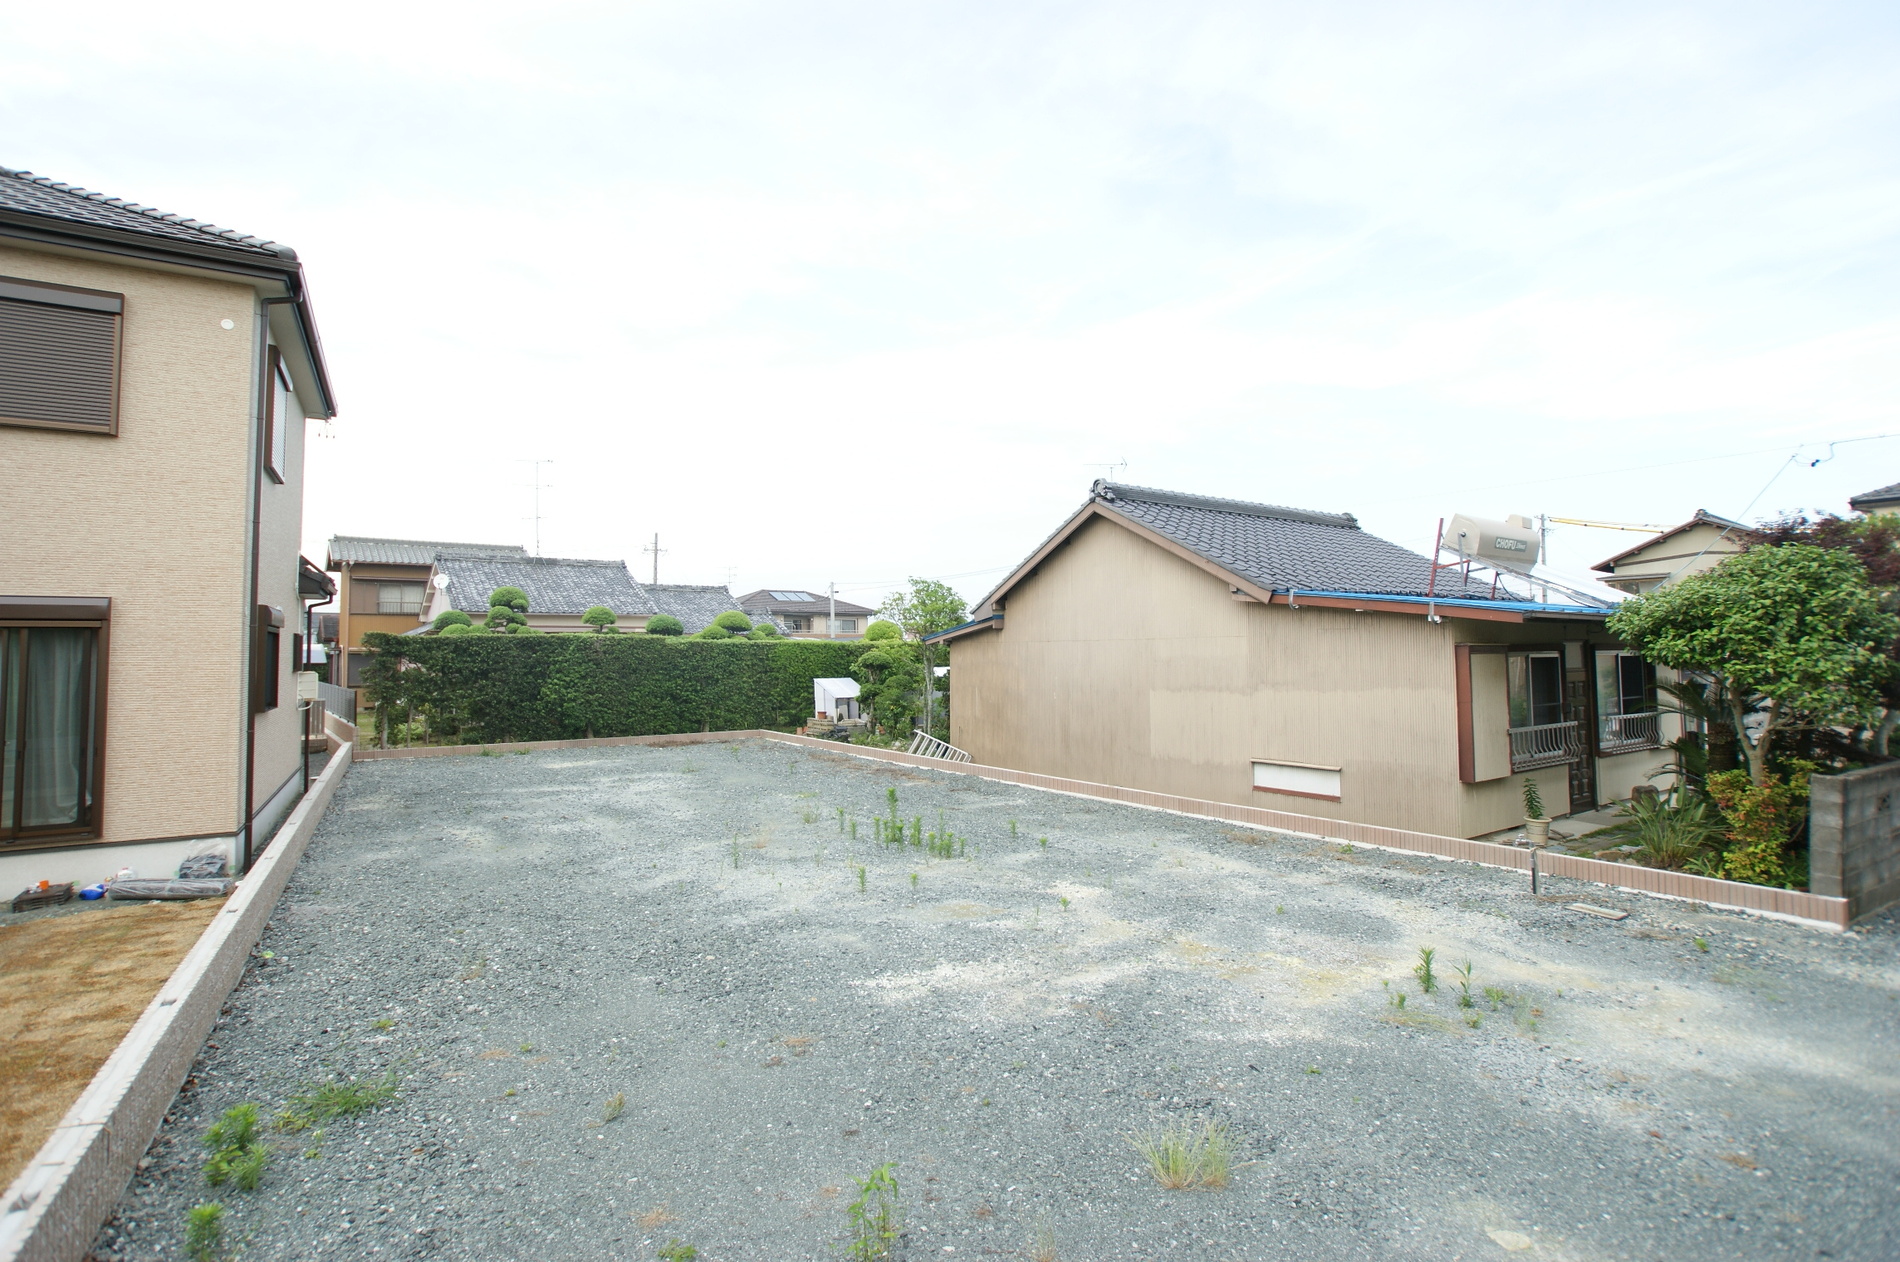 Local land photo. A quiet residential area. Totetsu Store (459m) and Seven-Eleven (406m), Shirowaki elementary school (409m) and aligned around. Local (June 2011) shooting